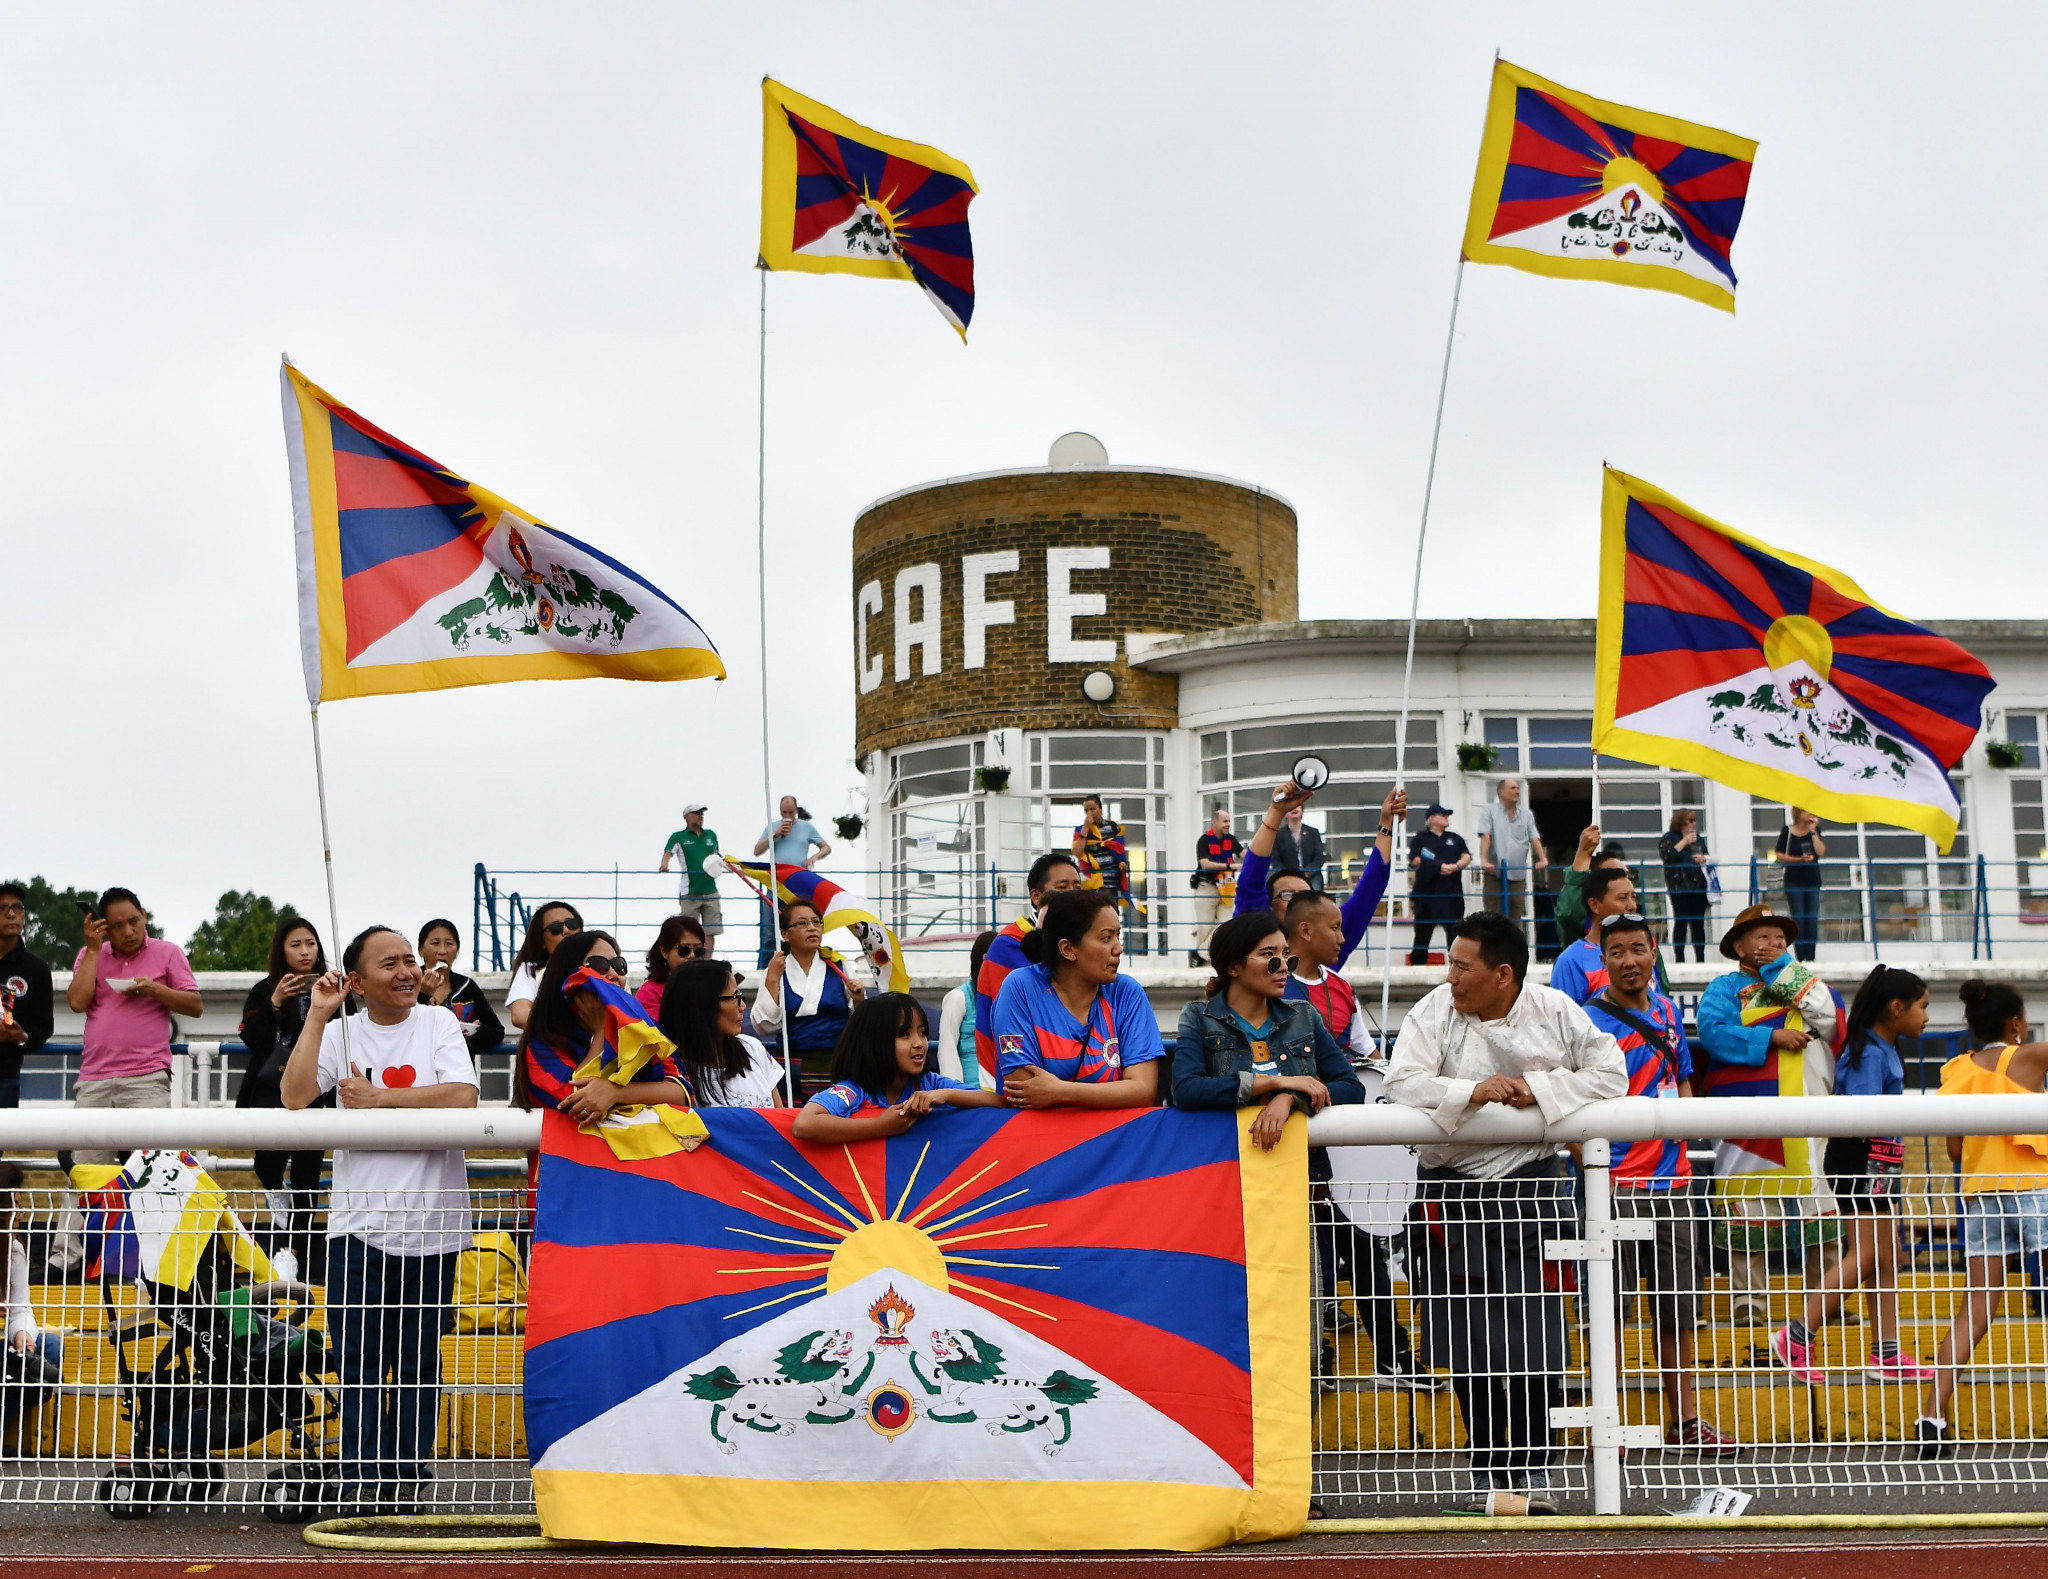 Tibet flags fly at the CONIFA World Football Cup in Enfield ©Getty Images